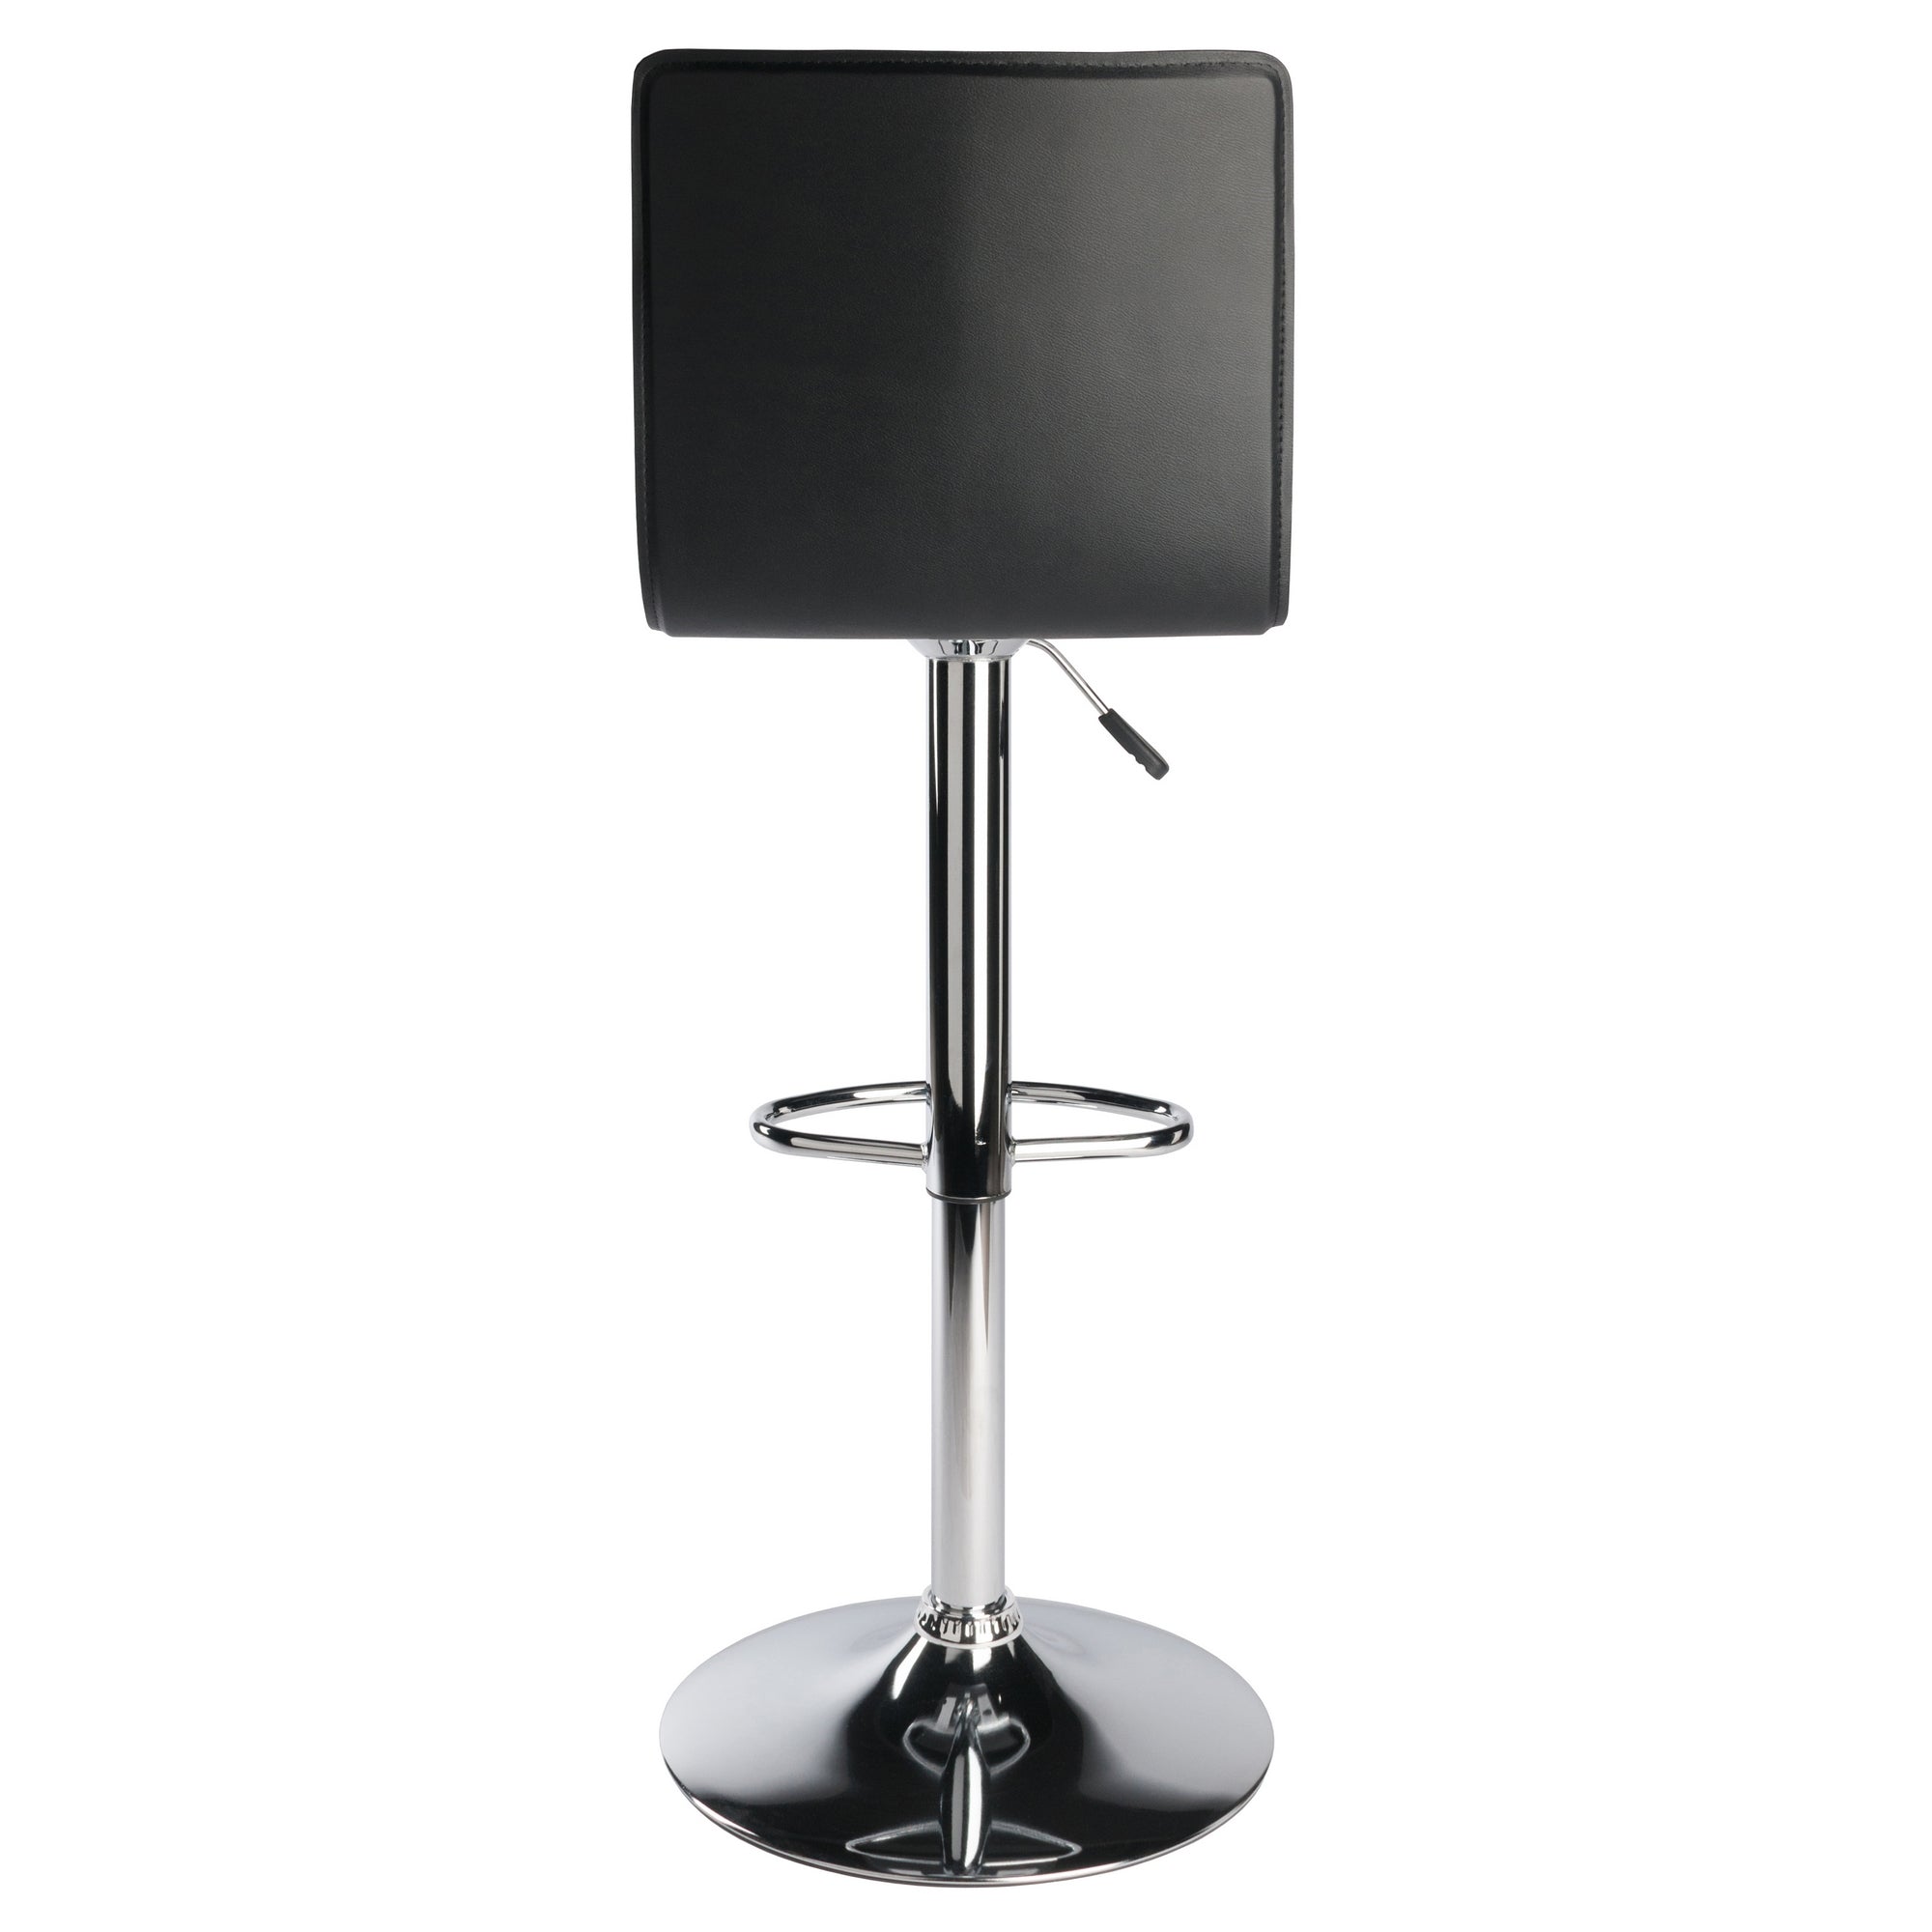 Winesome Wood Spectrum 3-Pc Bar Height Table with 2 Adjustable Air Lift L-Back Stools, Black and Chrome - The Bar Design